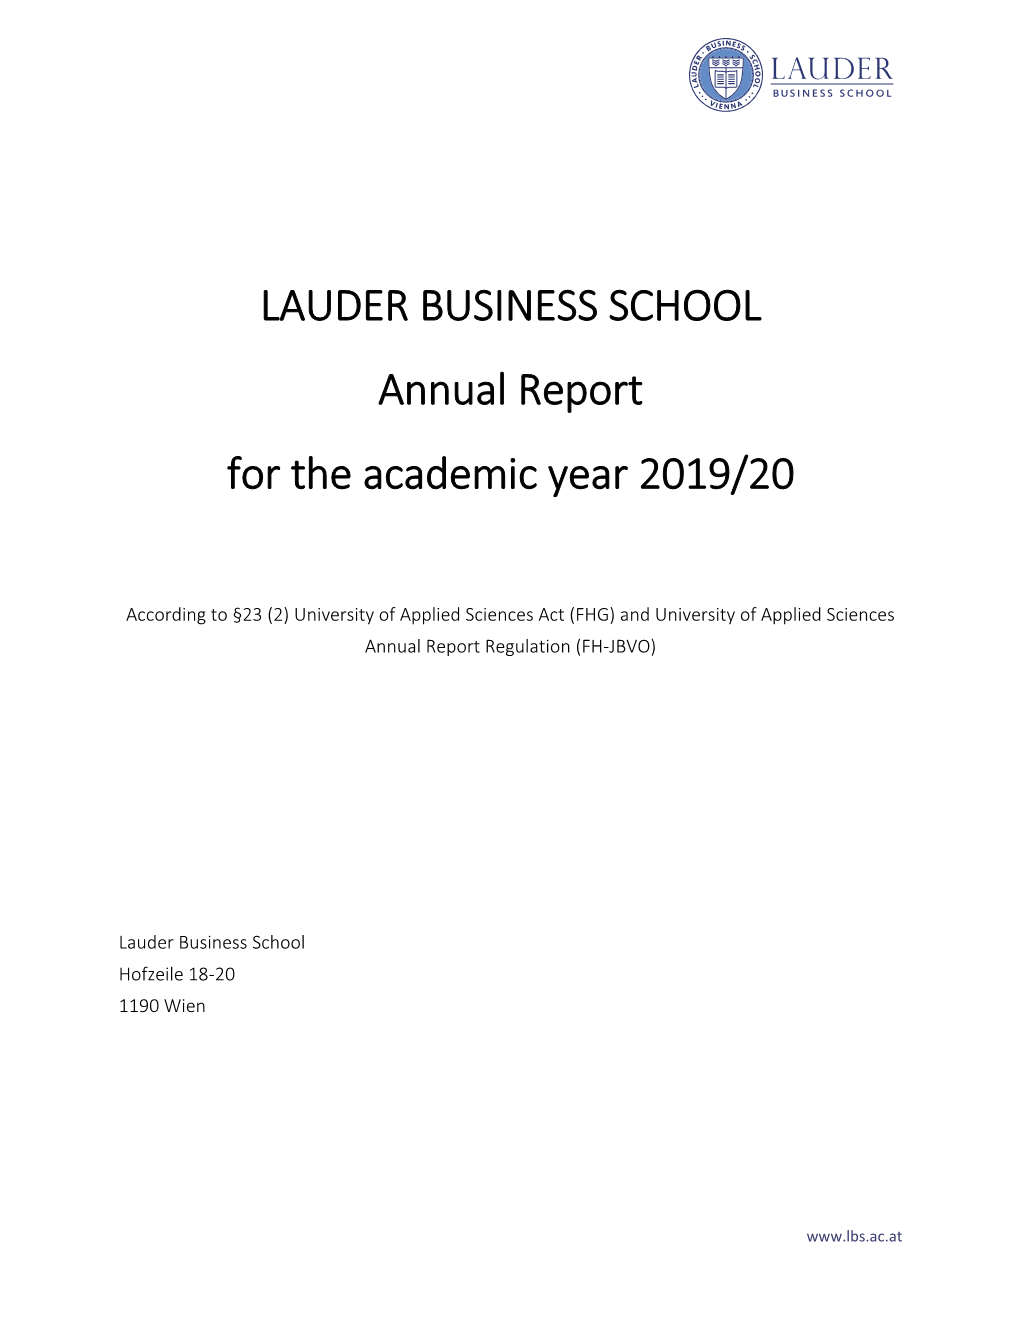 LAUDER BUSINESS SCHOOL Annual Report for the Academic Year 2019/20